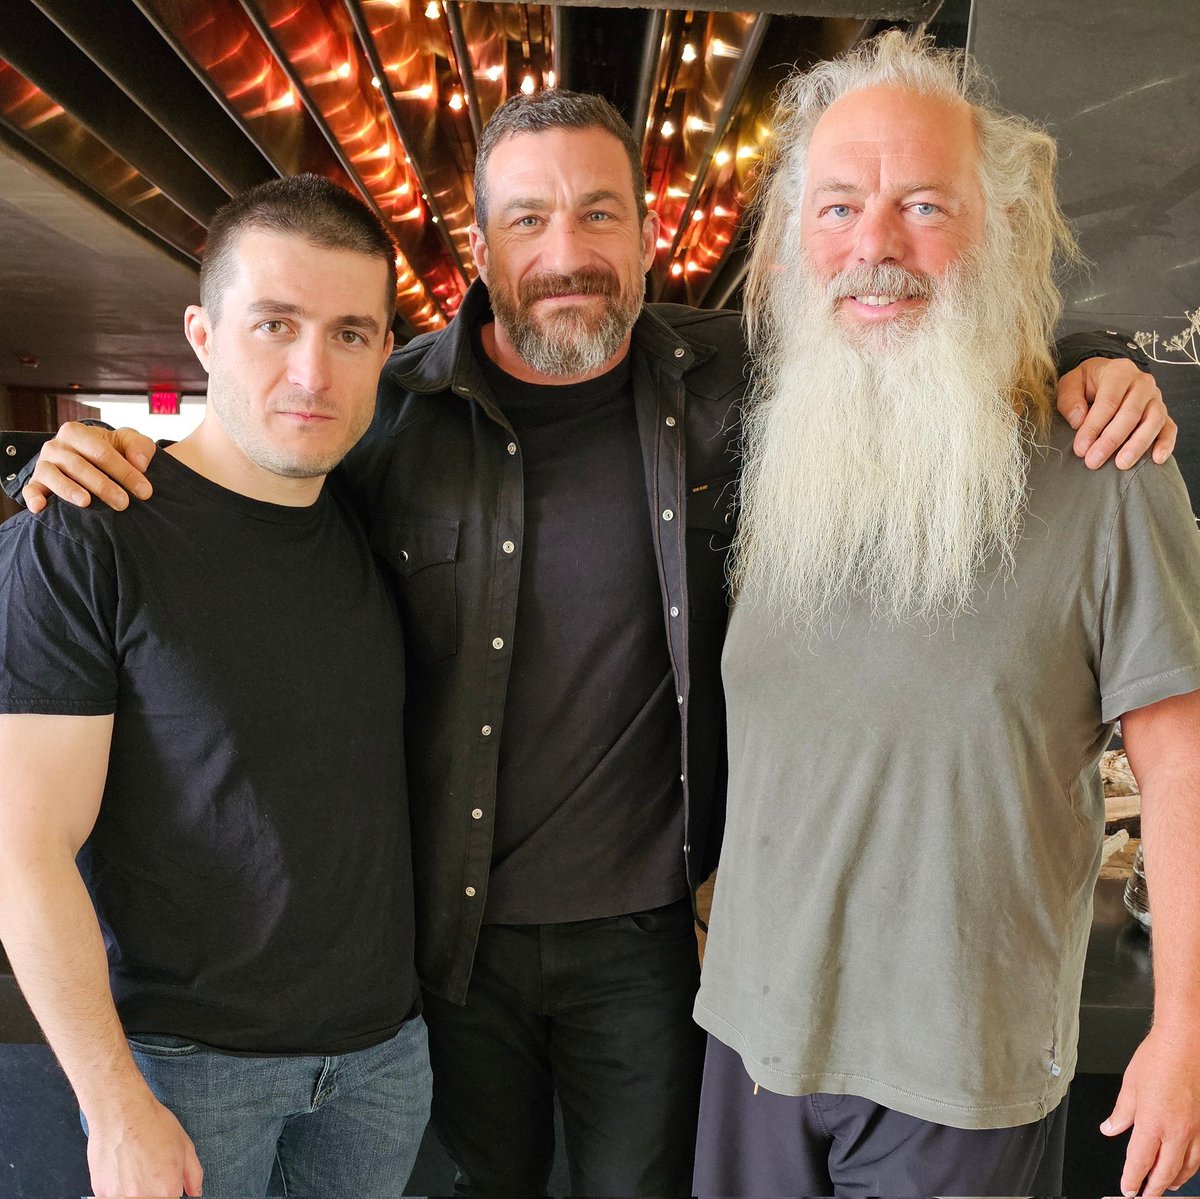 You show up to the Bitcoin halving party for the launch of Runes and run into these three guys WDYD?